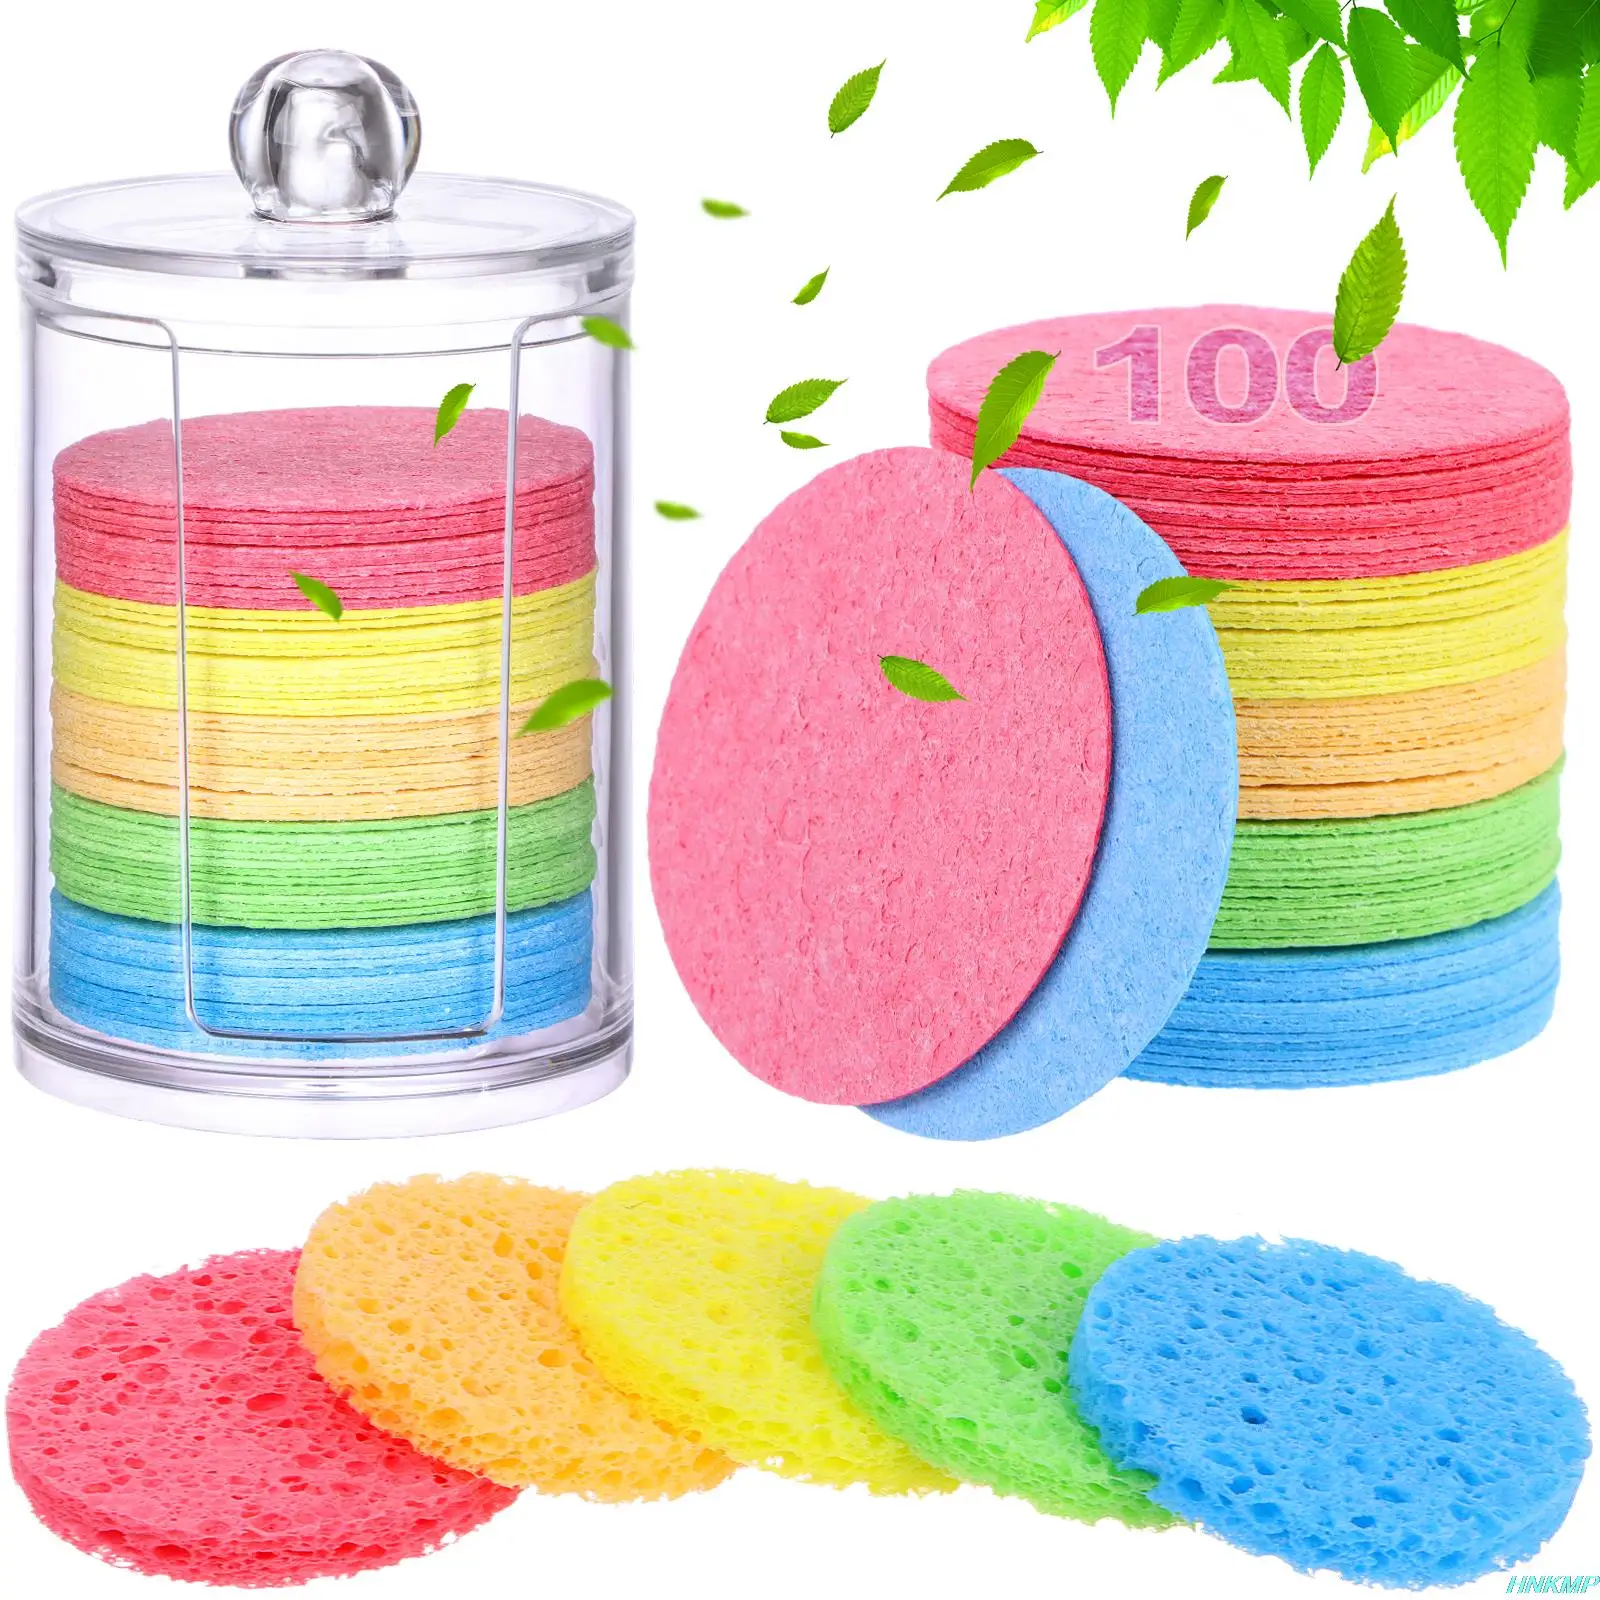 

100 Pieces Compressed Facial Sponges with Plastic Storage Container for daily face wash, deep pore cleansing, exfoliating